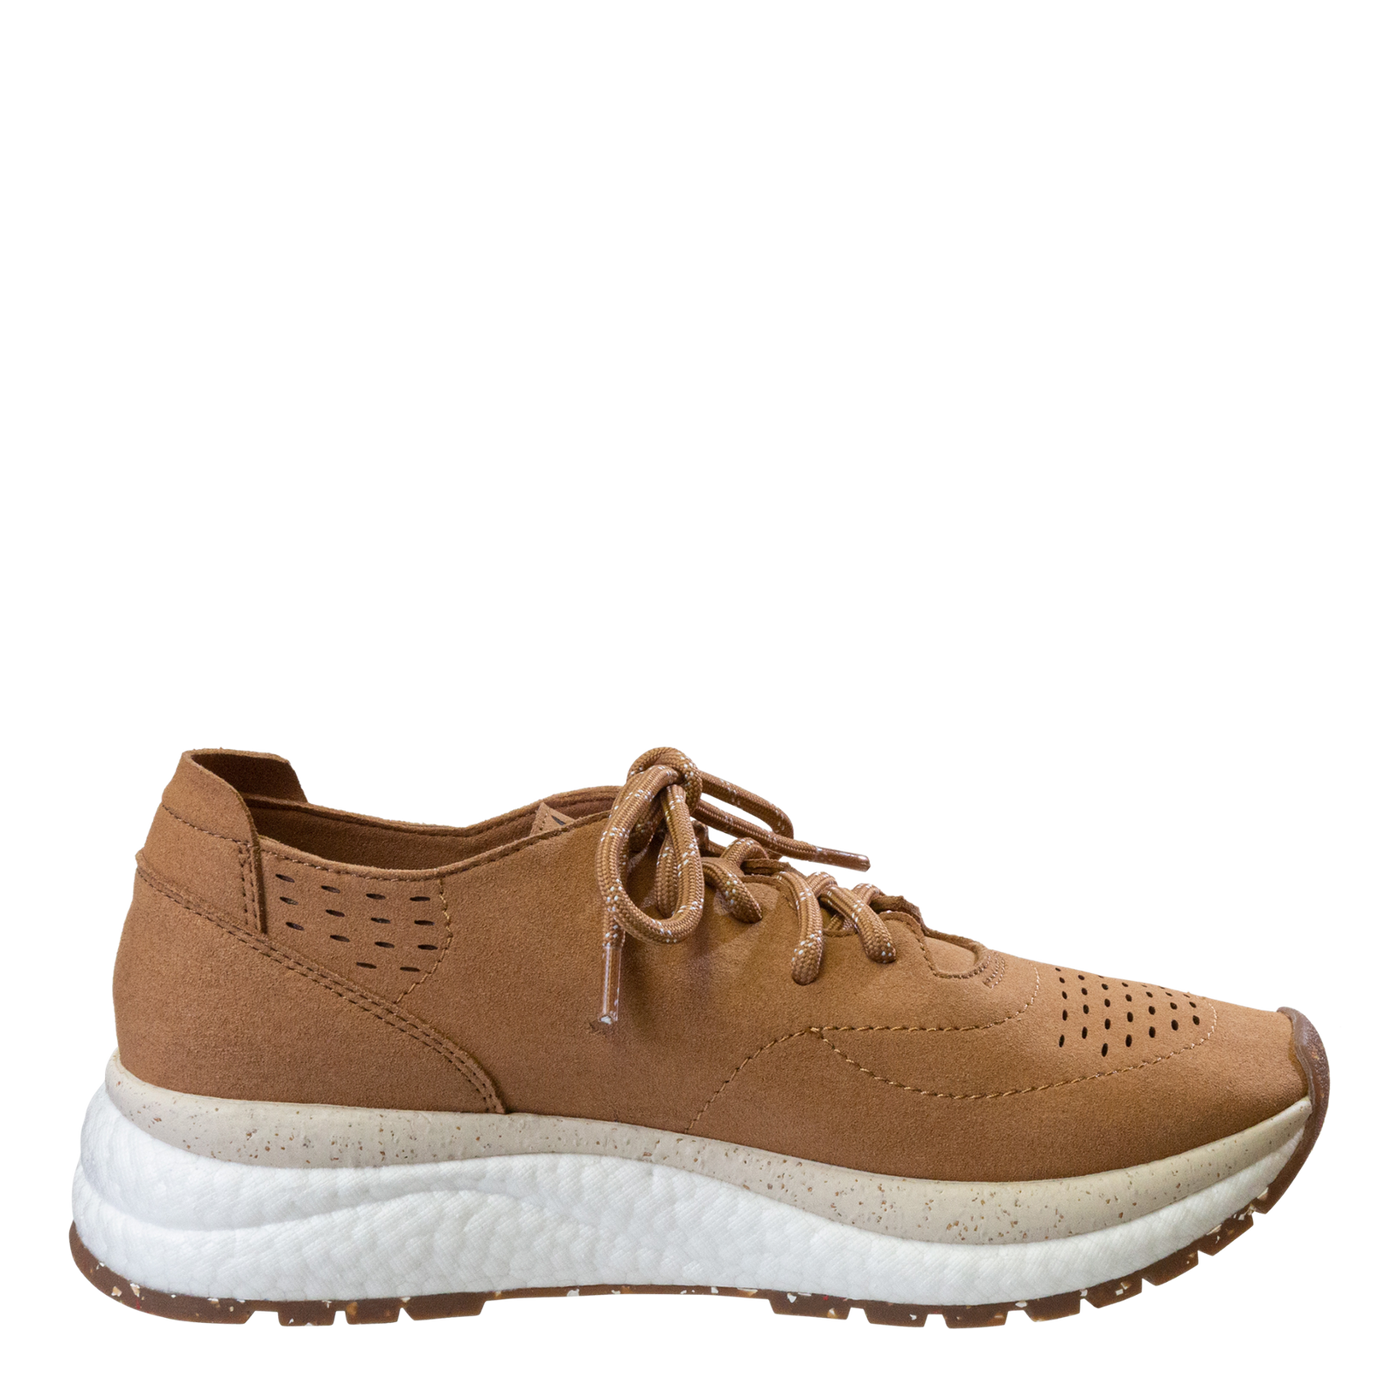 OTBT - FREE in CAMEL Sneakers